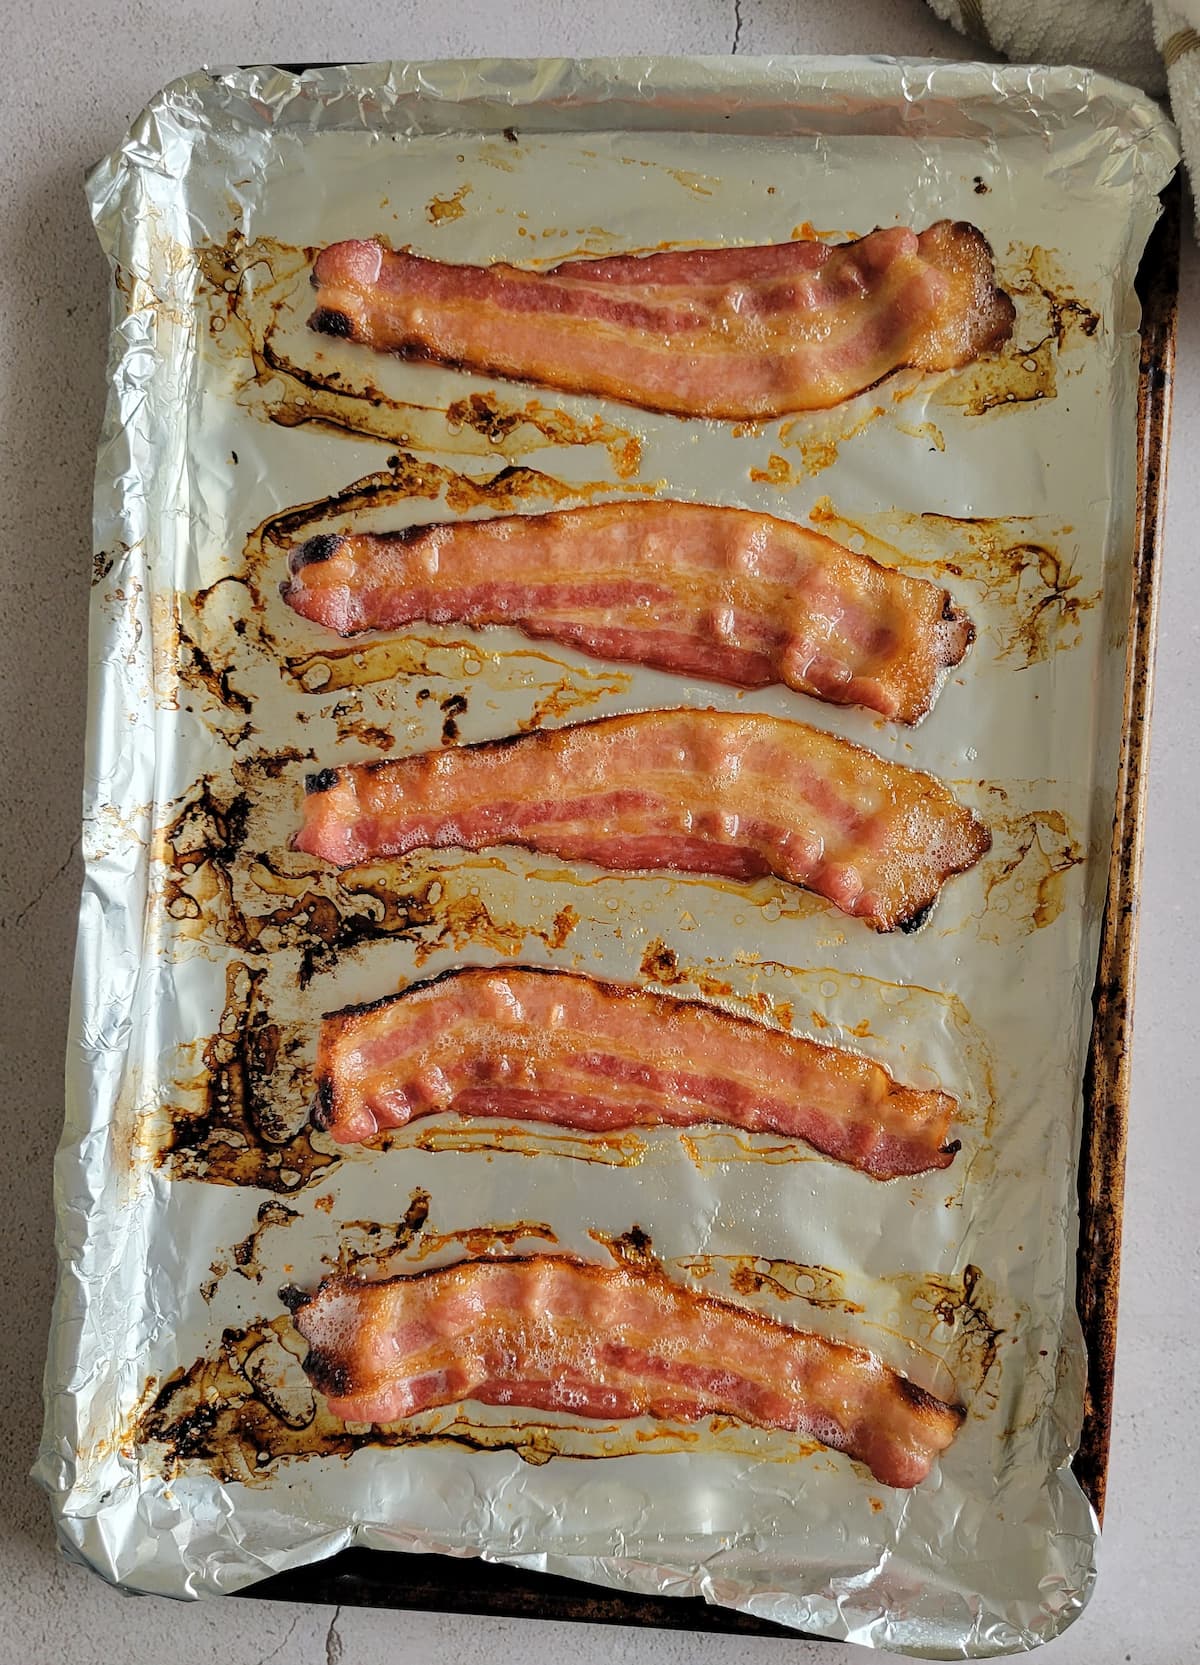 5 cooked strips of bacon on a foil rimmed baking sheet